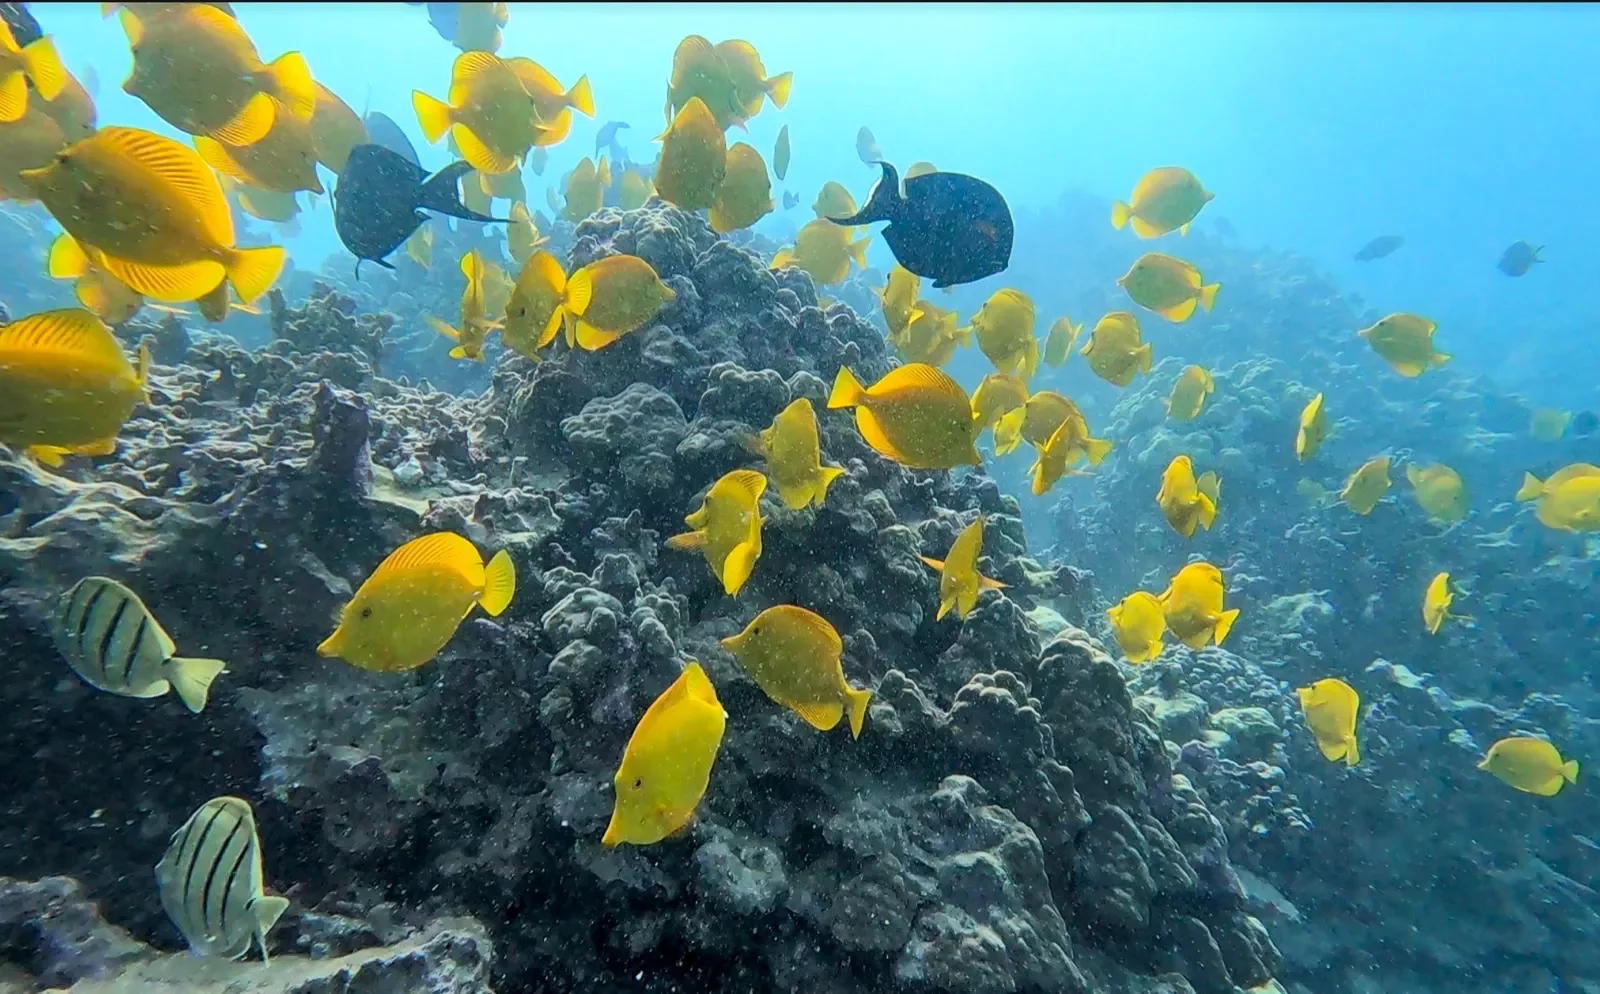 Colorful yellow fish swimming in the ocean by Hawaii